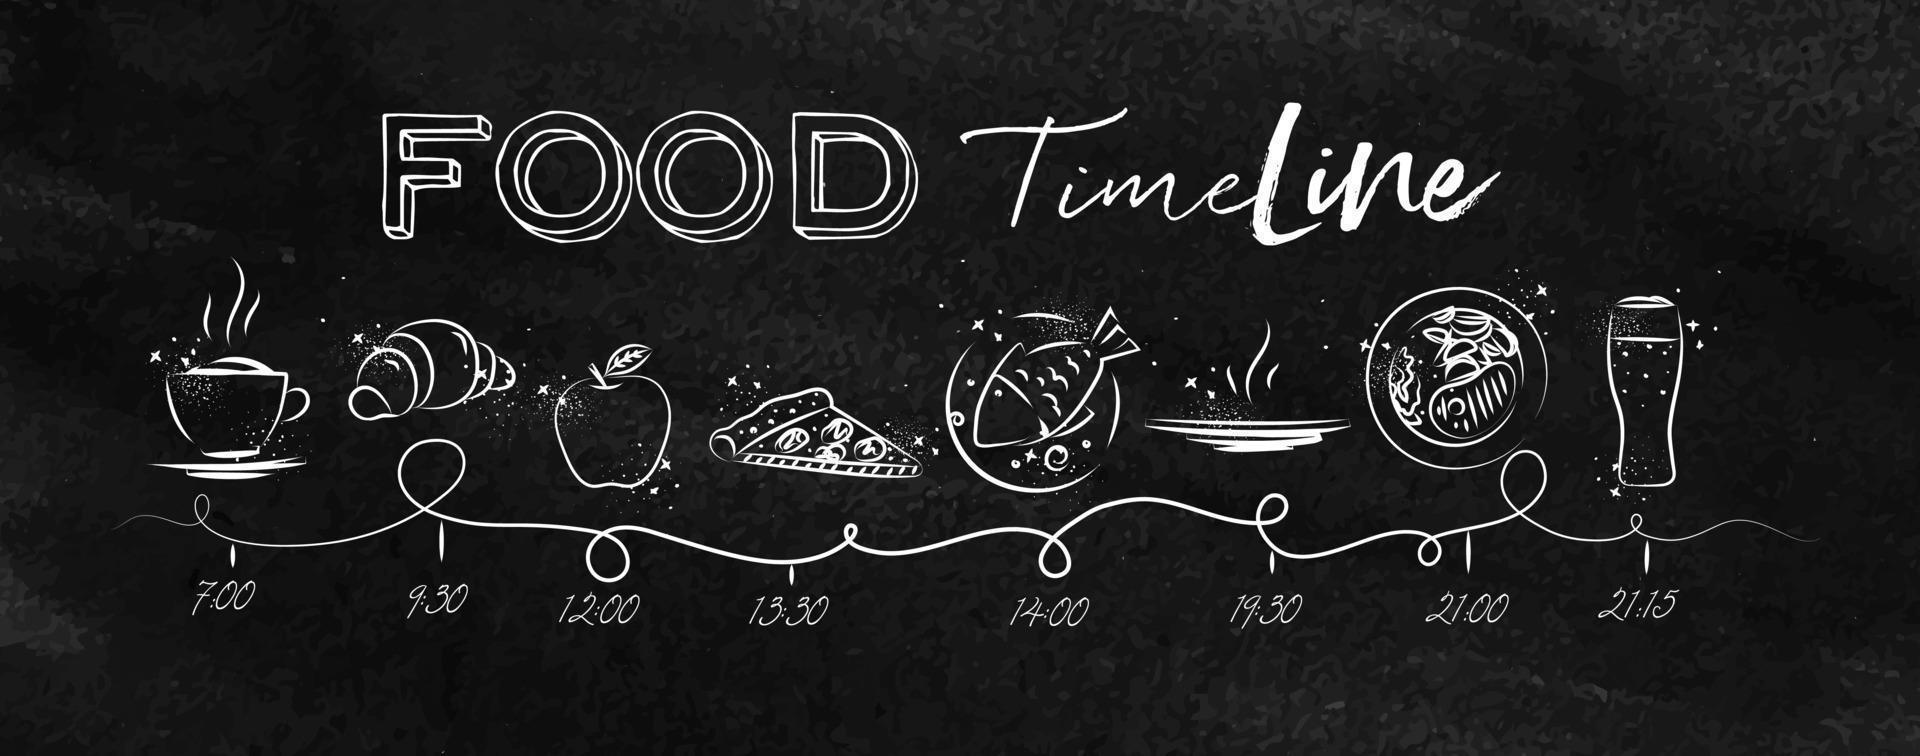 Timeline on healthy food theme illustrated time of meal and food icons drawing with chalk on chalkboard vector